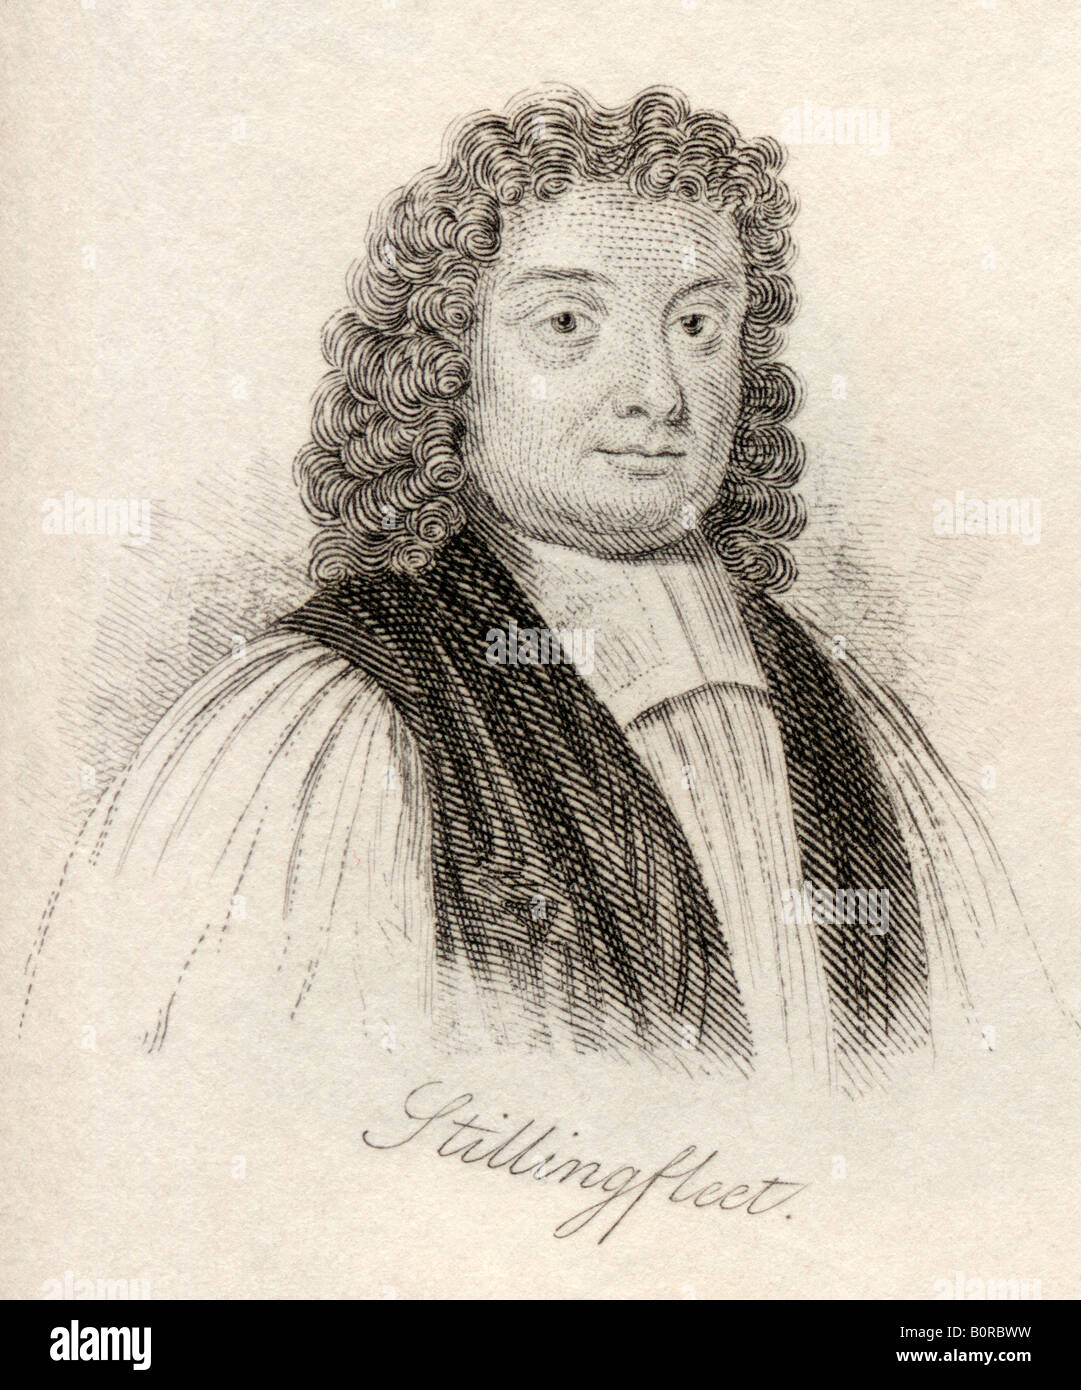 Edward Stillingfleet, 1635 - 1699.  British theologian.  From the book Crabbs Historical Dictionary published 1825 Stock Photo